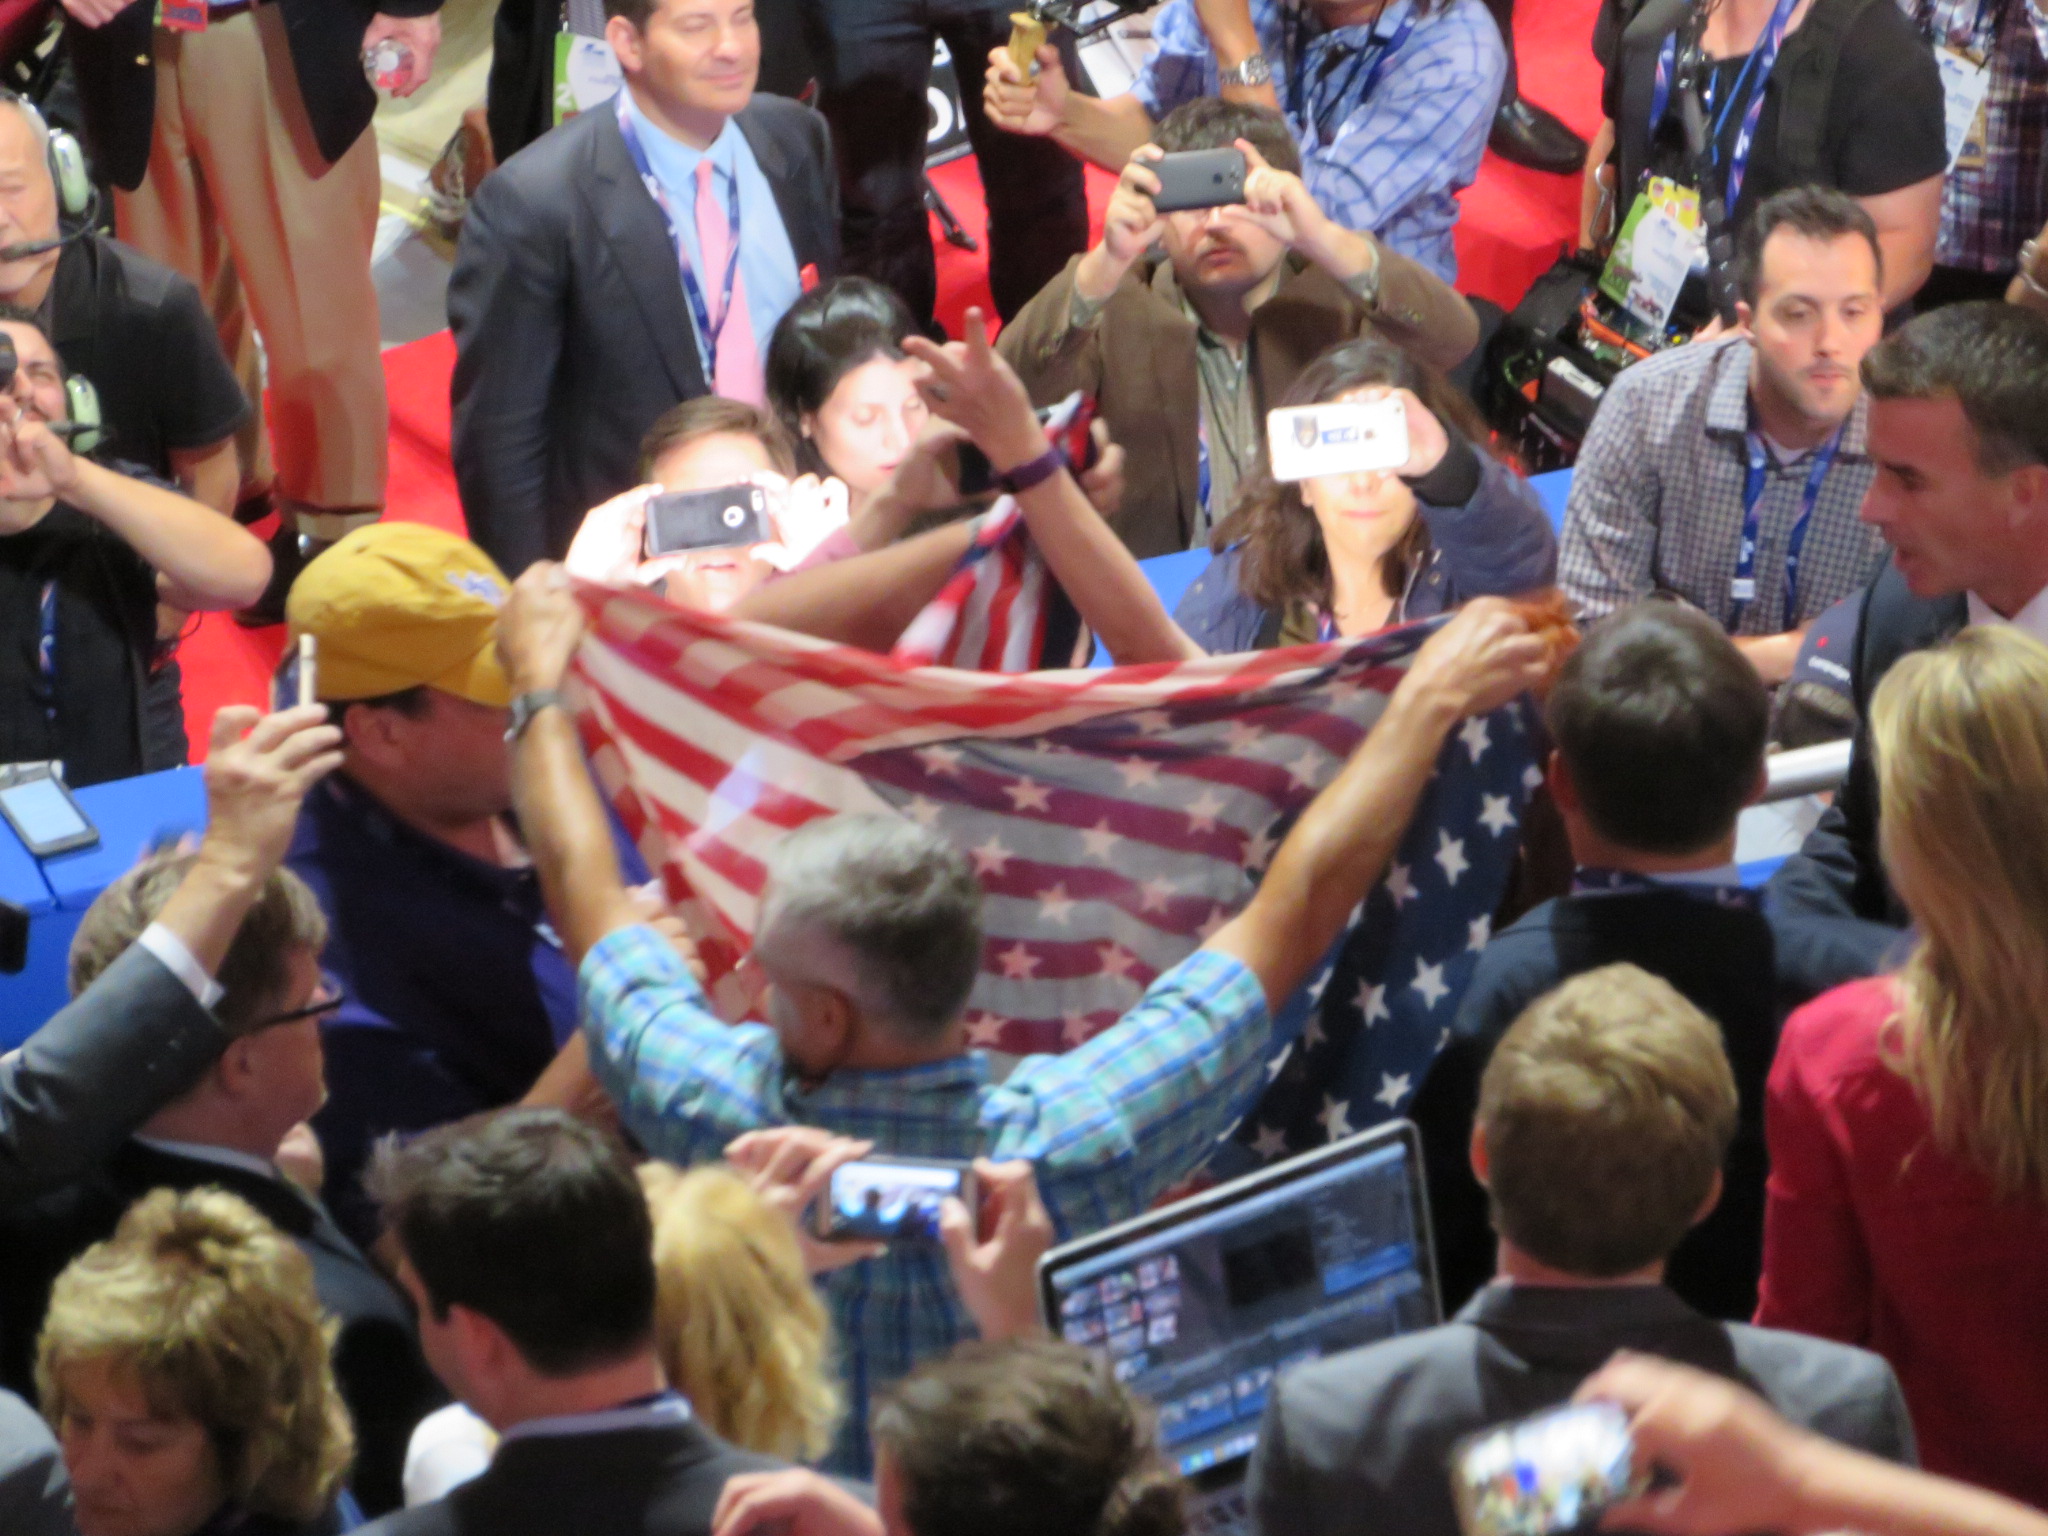 A Code Pink protester pokes a victory sign threw a shroud of American flags created by angered delegates at the Republican National Convention in Cleveland on July 19, 2016. (Ron Kampeas)